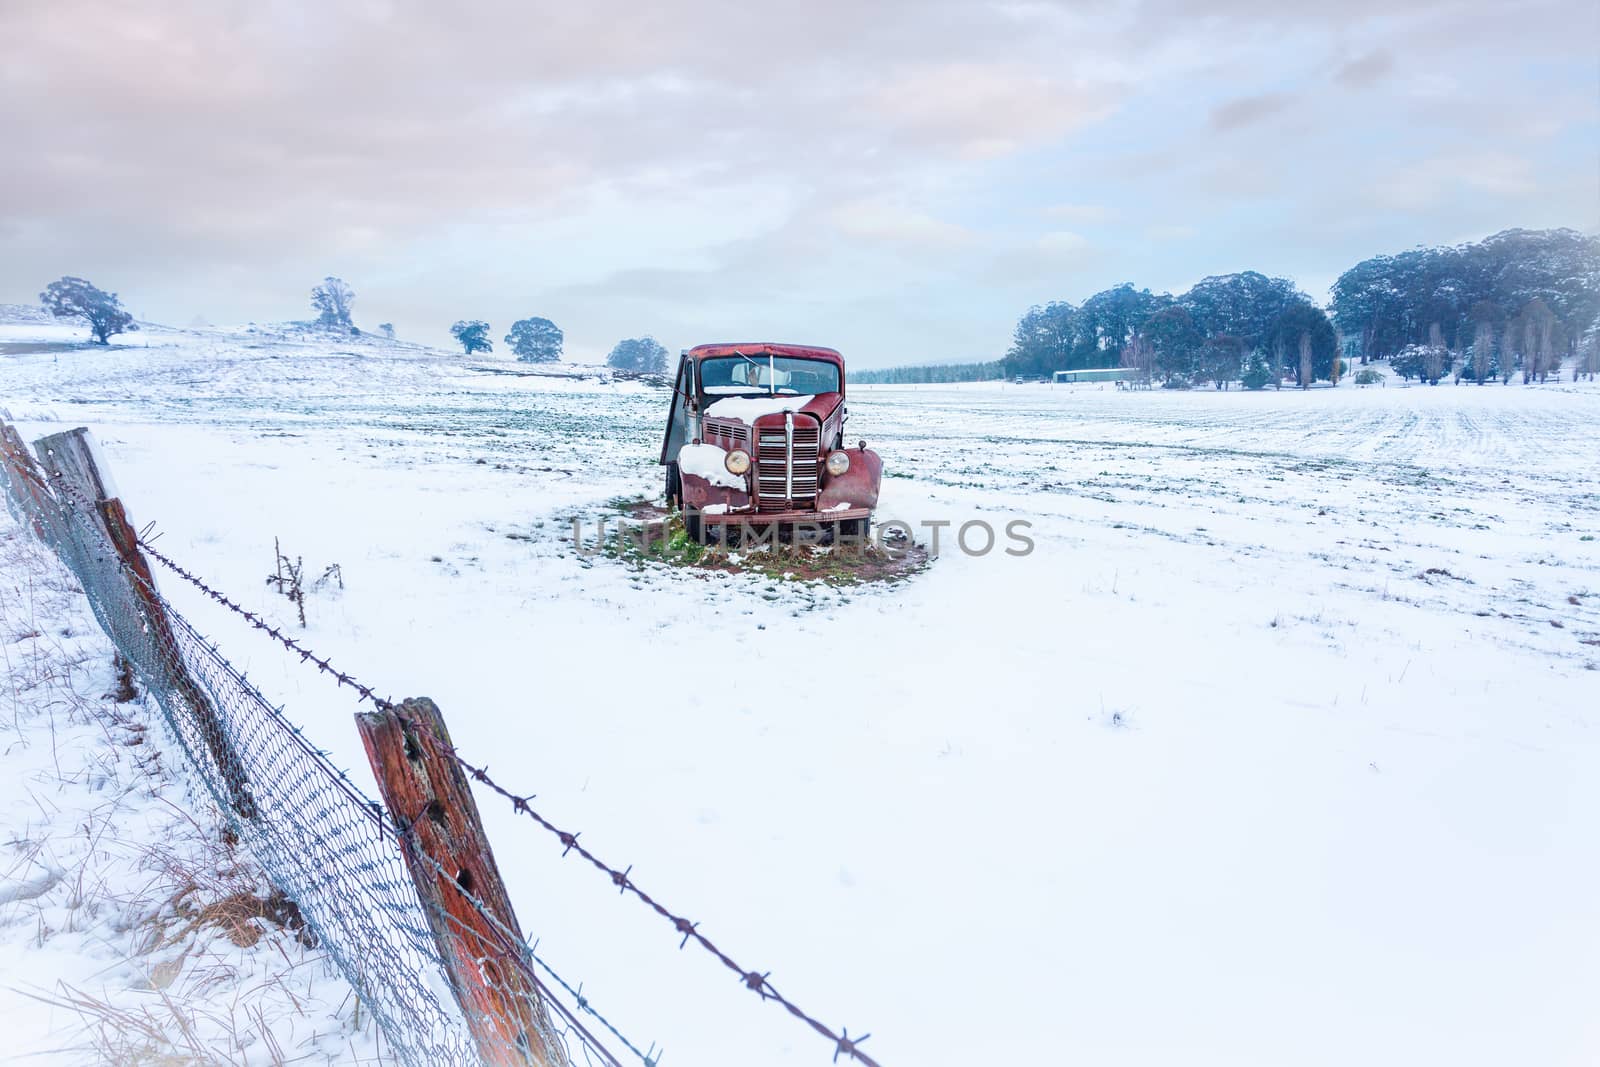 A rusty old vintage car sits in a snow covered field in winter.   There is a leaning rusty barbed wire fence in the foreground .   Space for copy